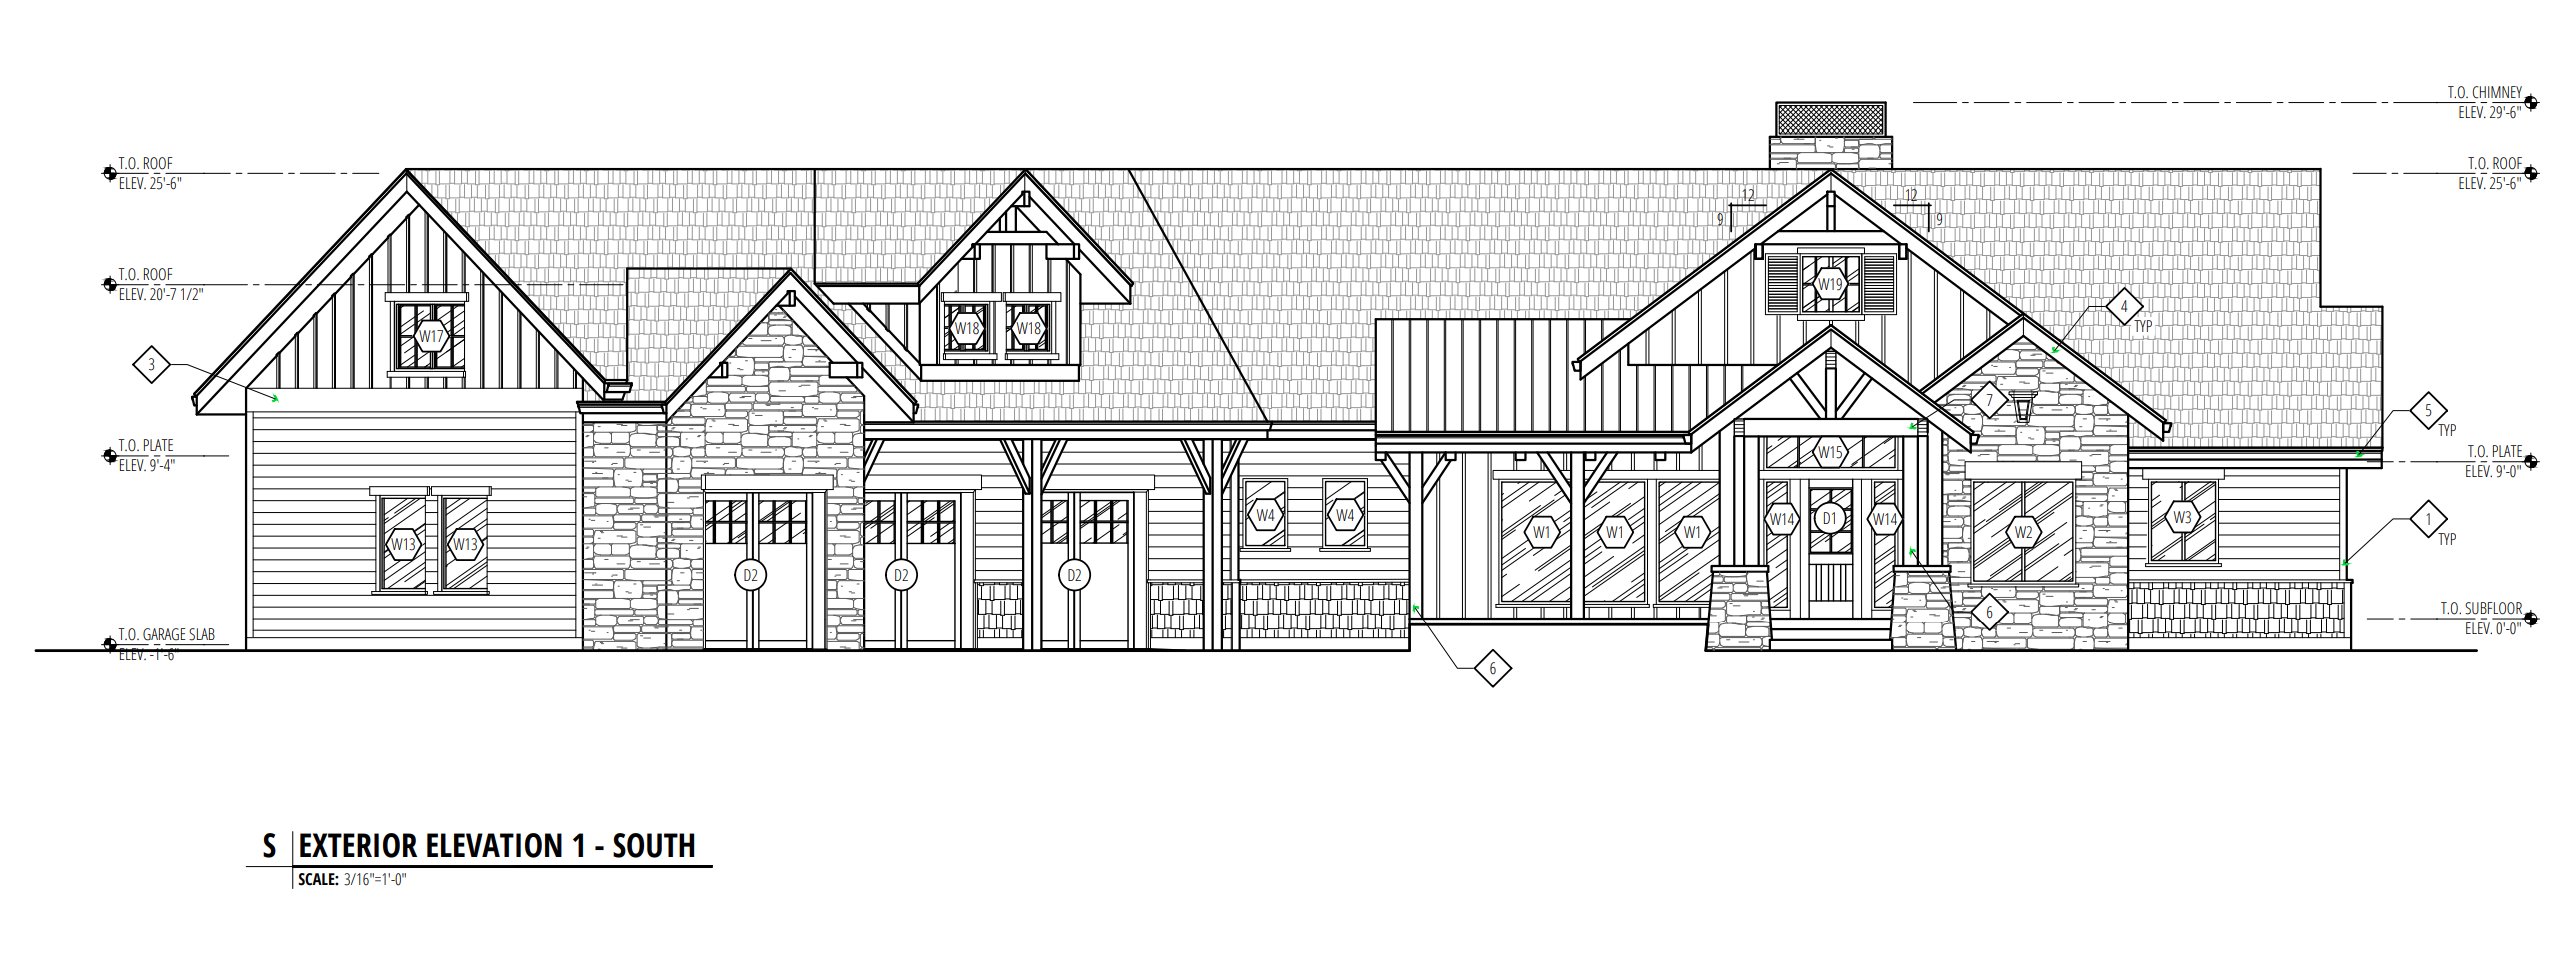 Our architects and drafters take your sketch and can turn it into a CAD plan overnight.